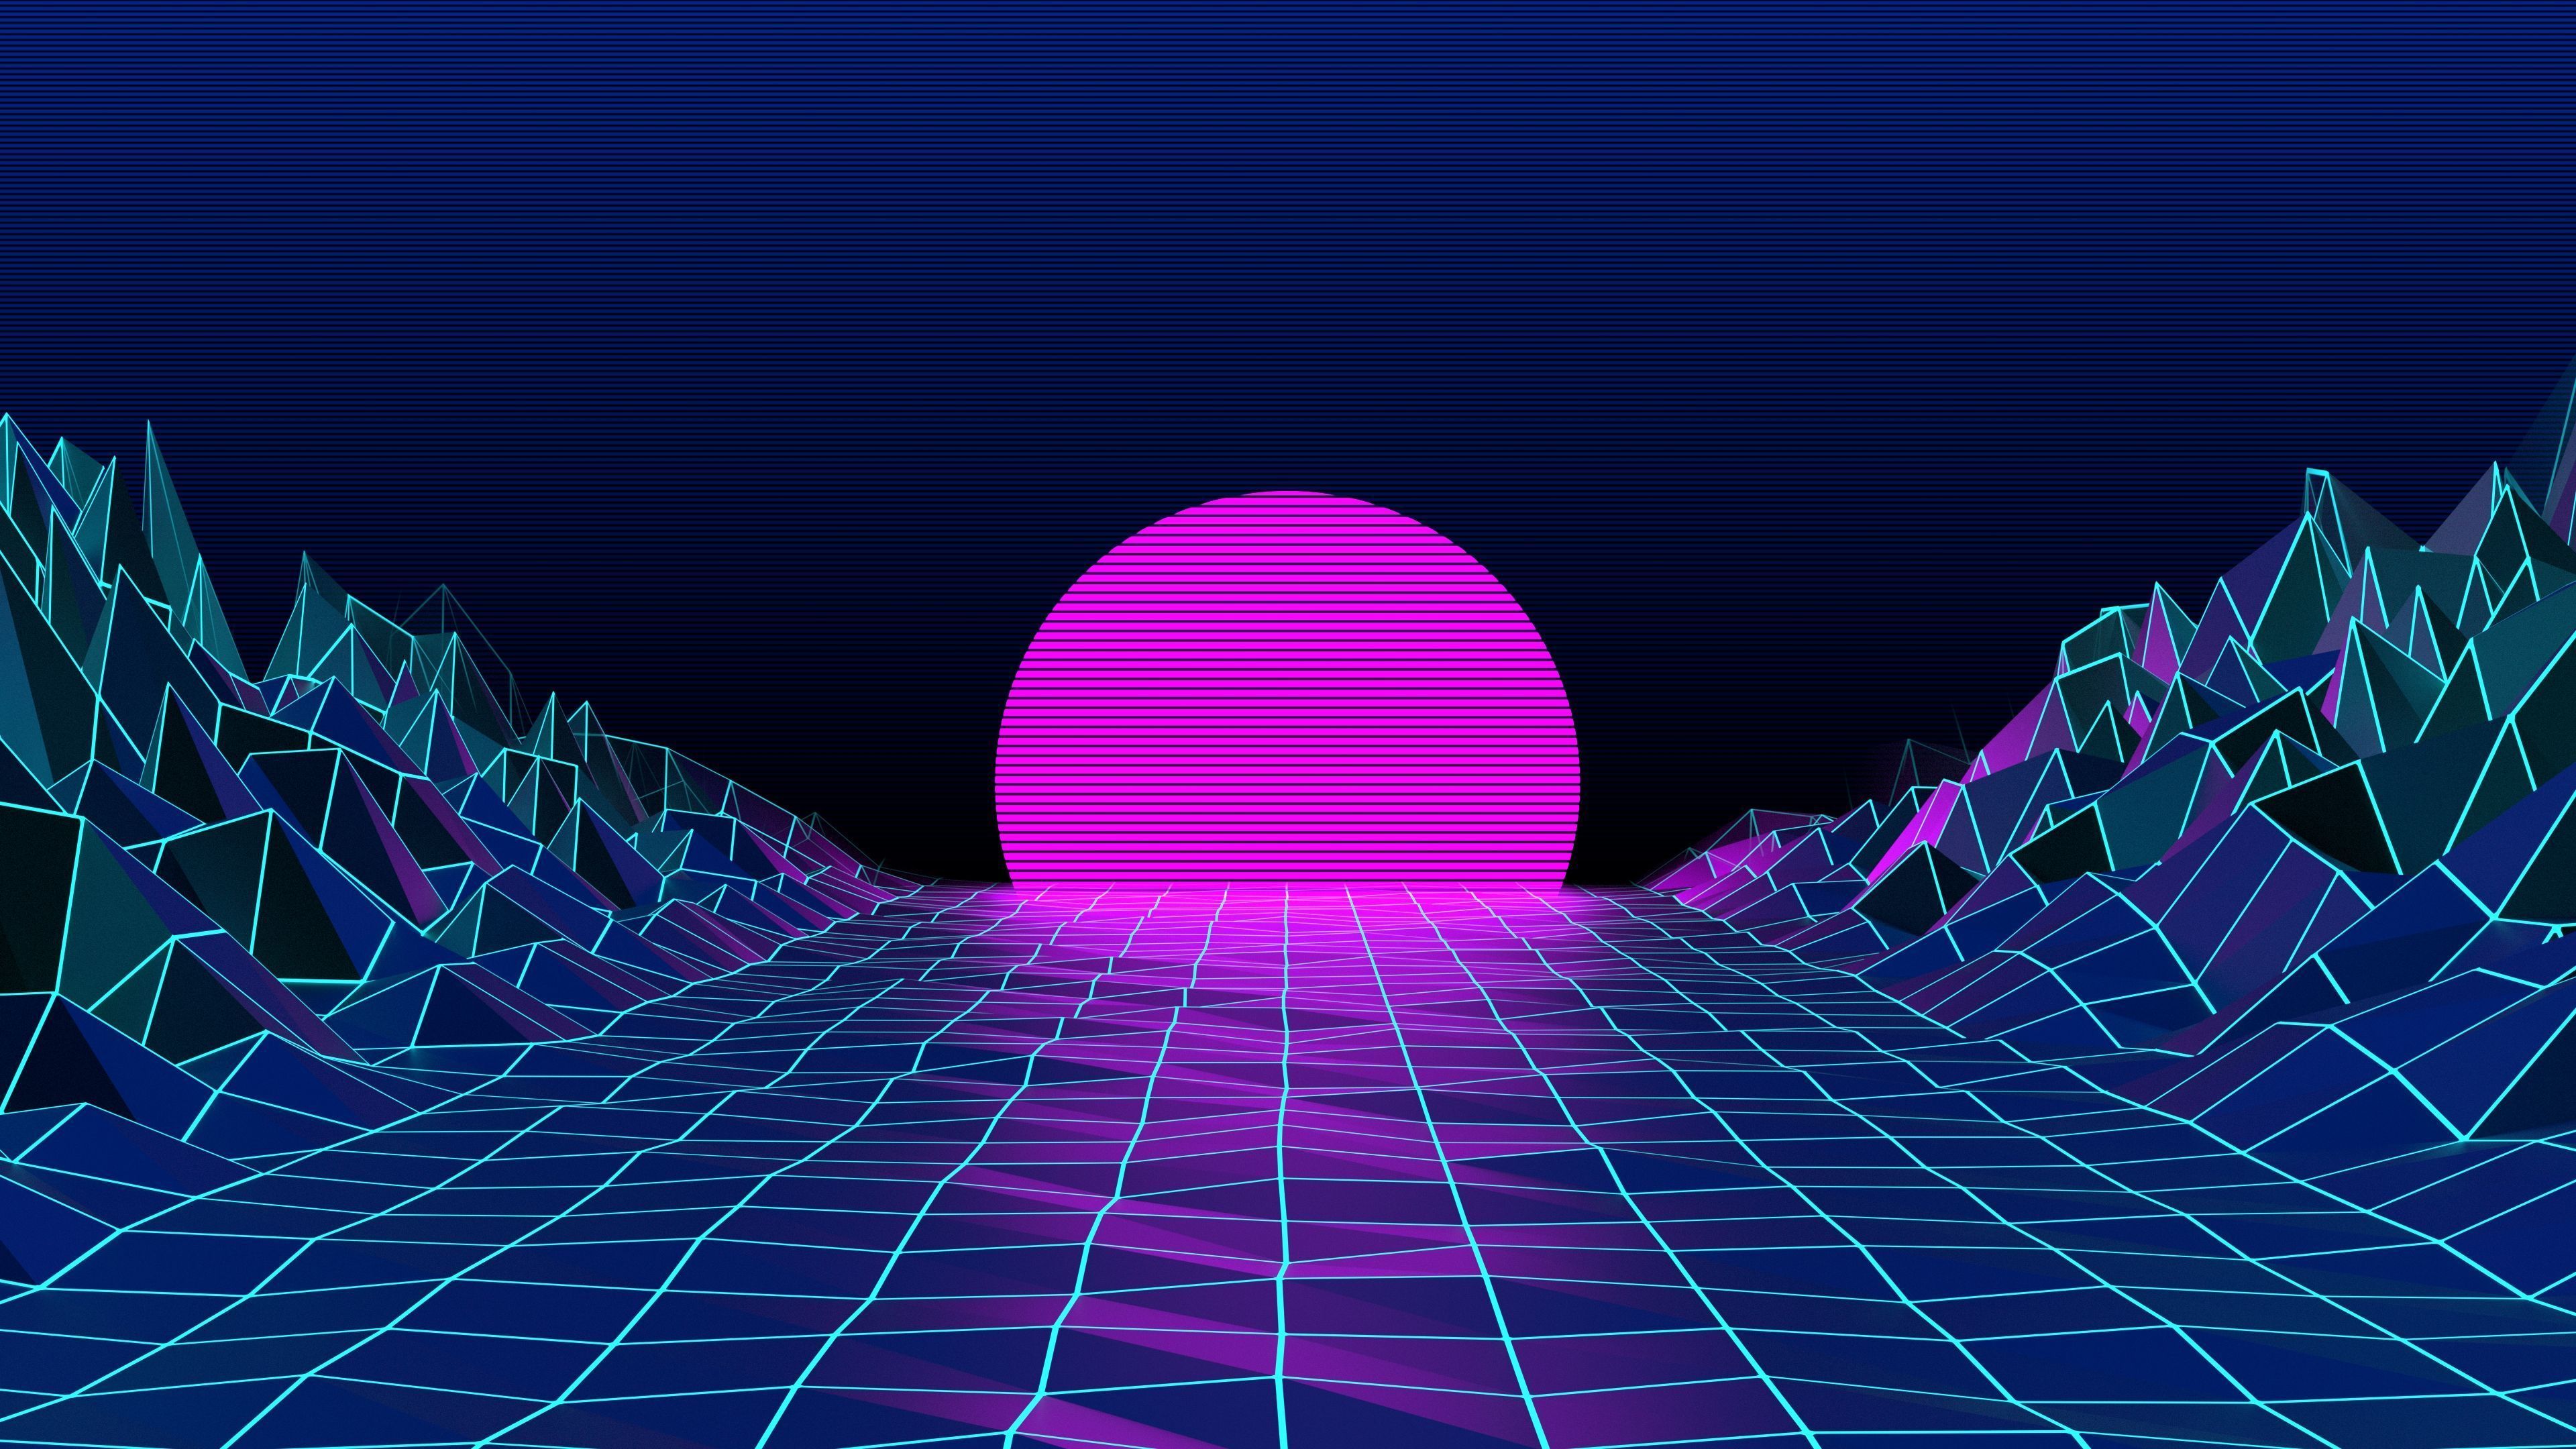 A neon colored tunnel with mountains and an egg - Low poly